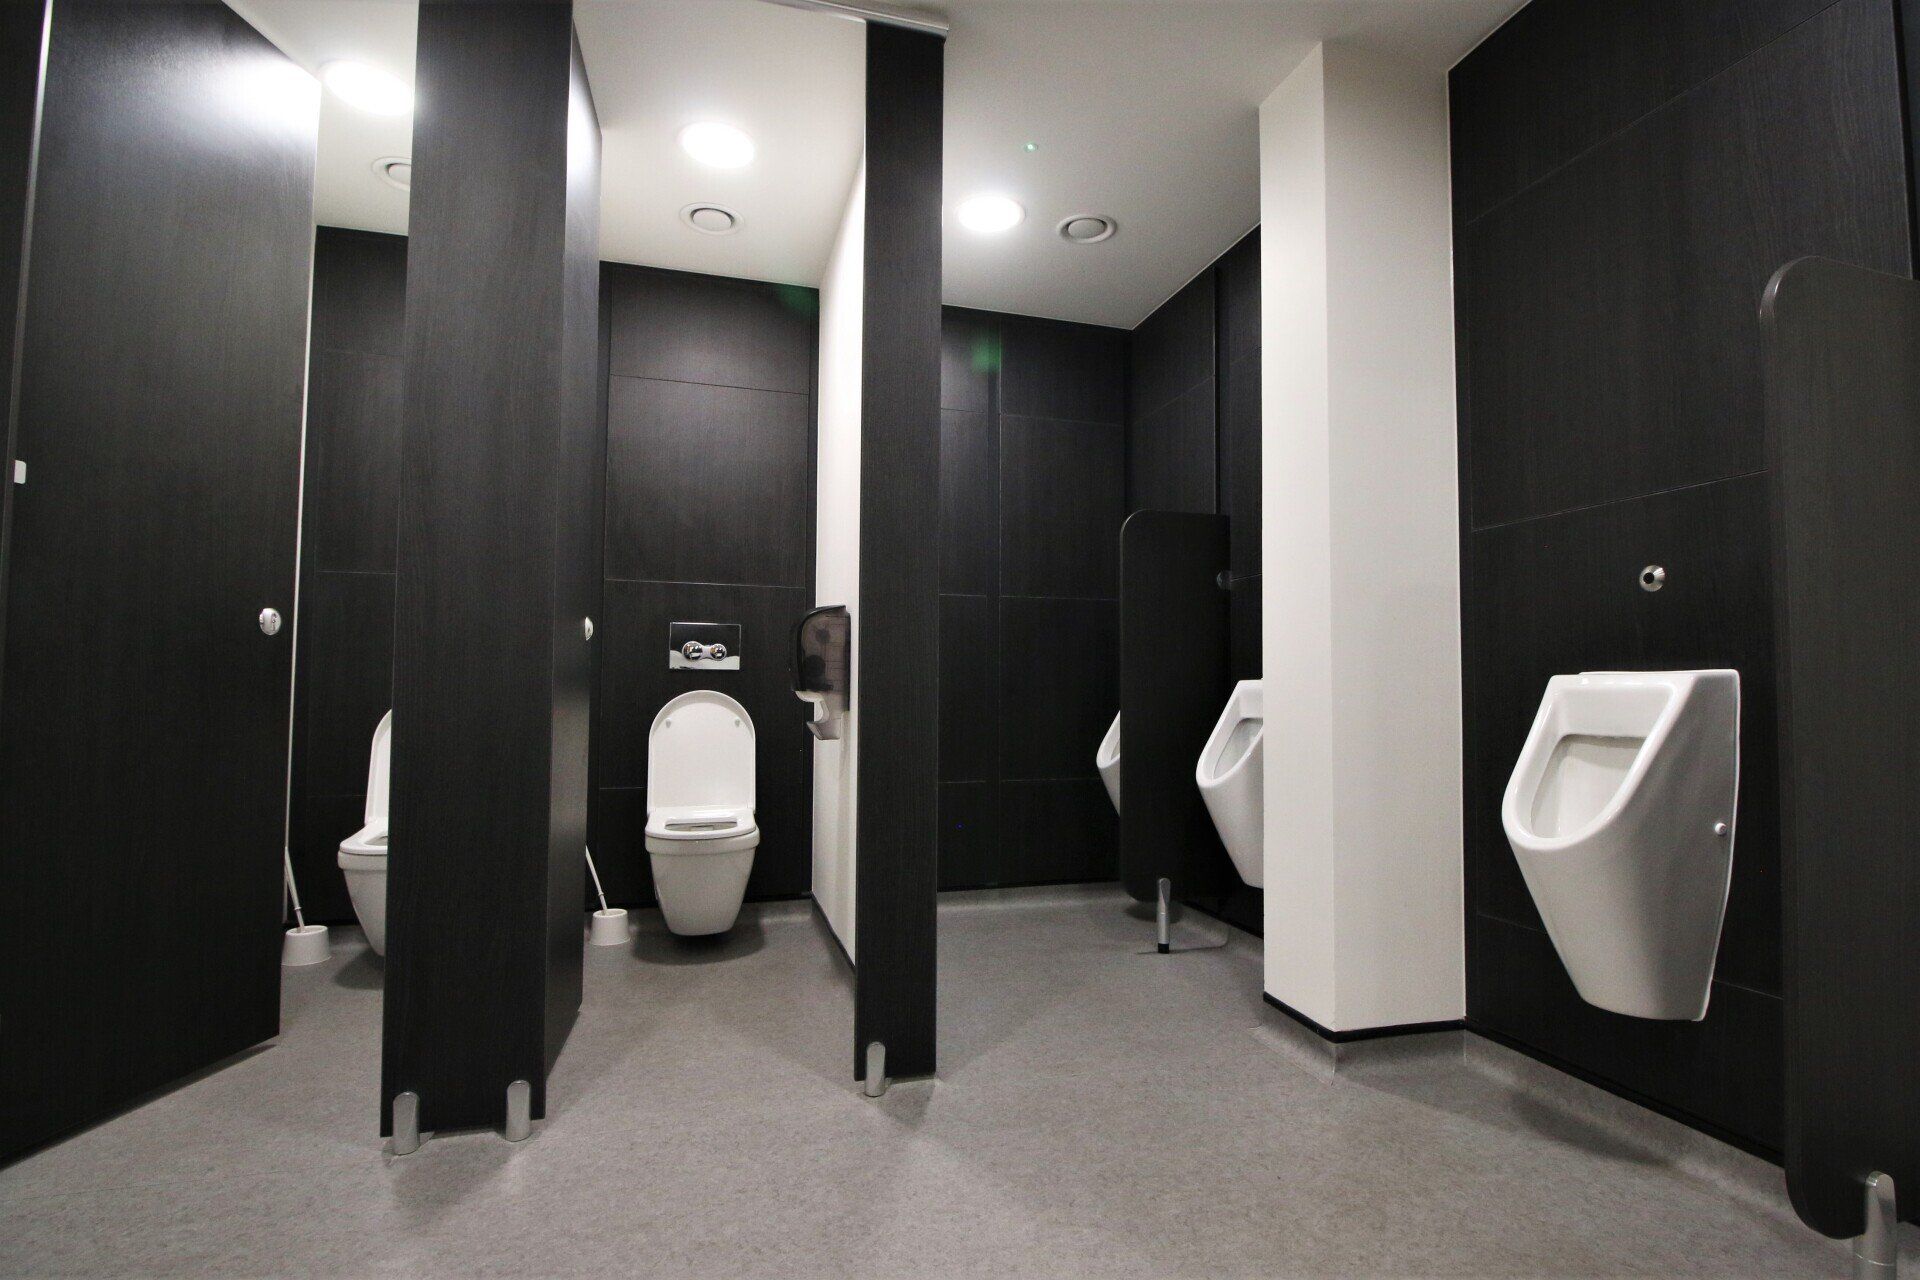 a row of toilets and urinals in a public restroom